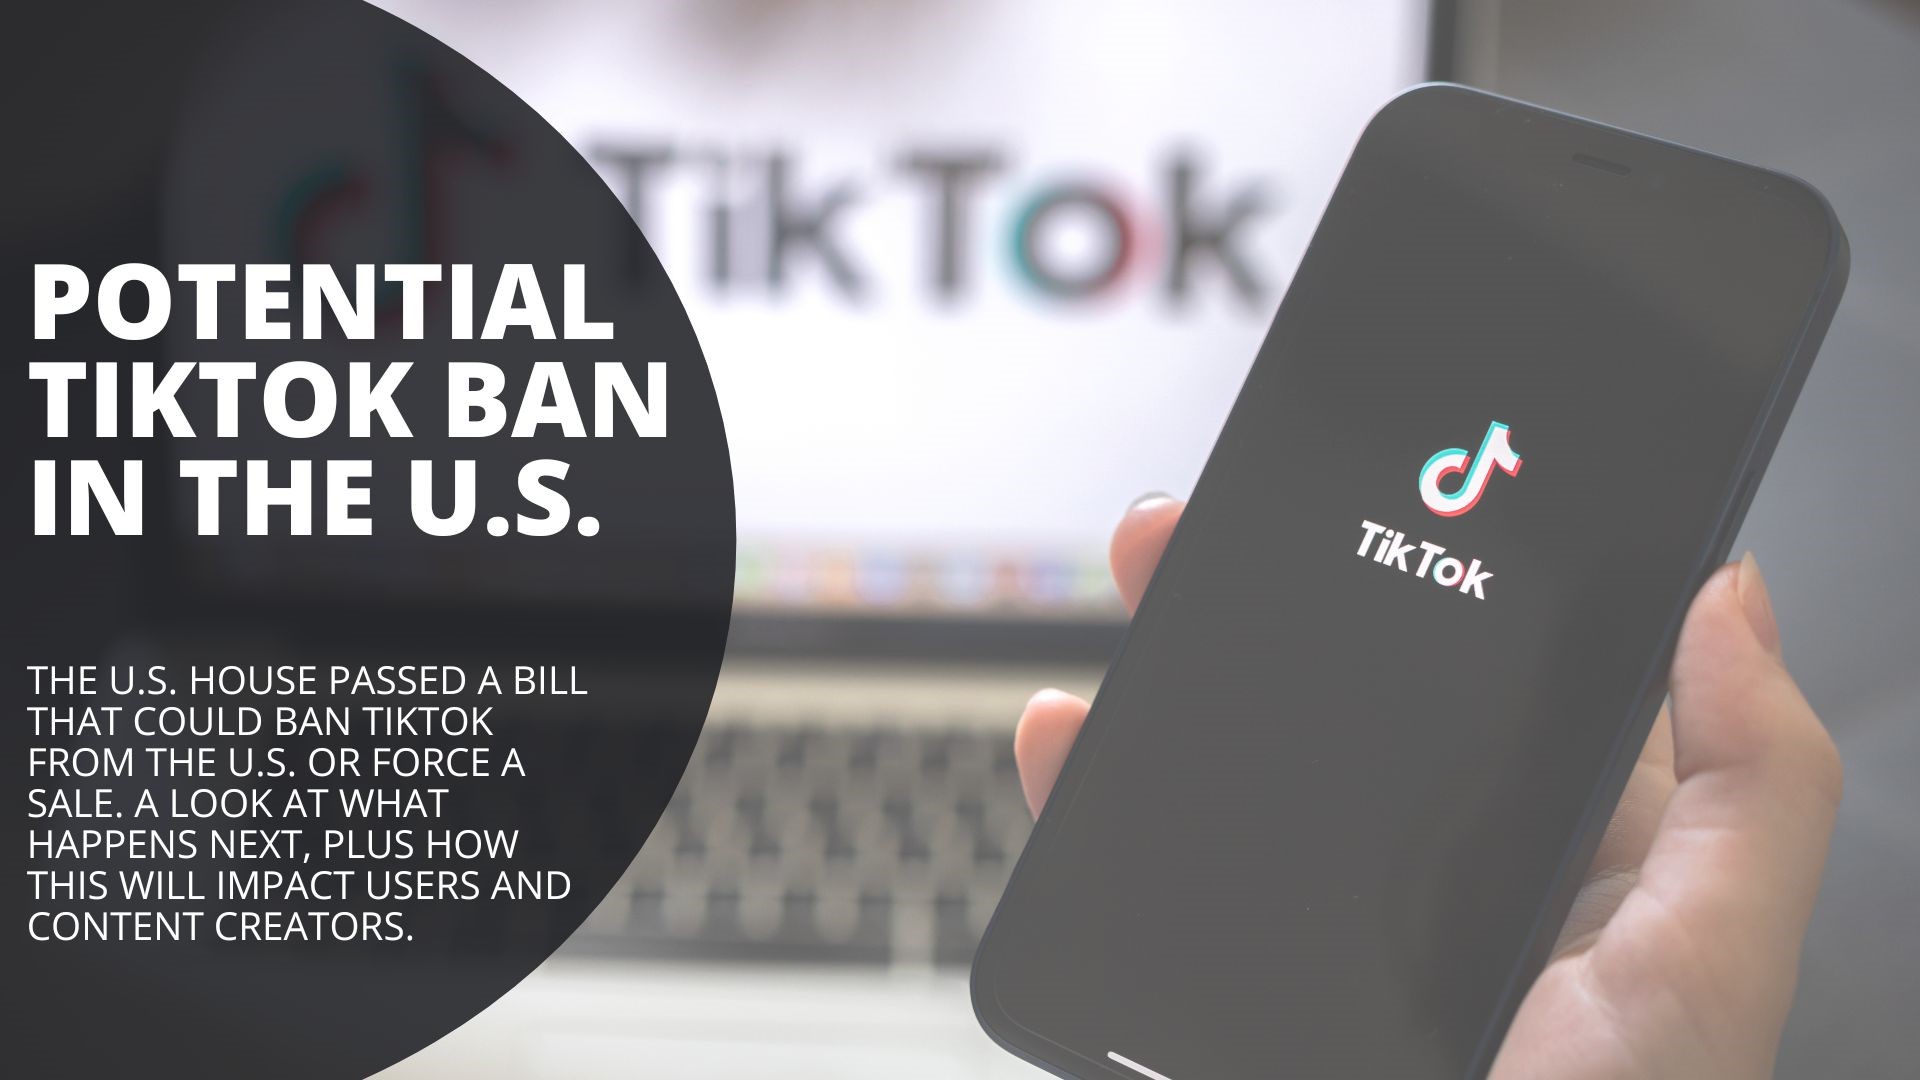 The U.S. House passed a bill that could ban TikTok from the U.S. or force a sale. A look at what happens next, plus how this could impact users and content creators.